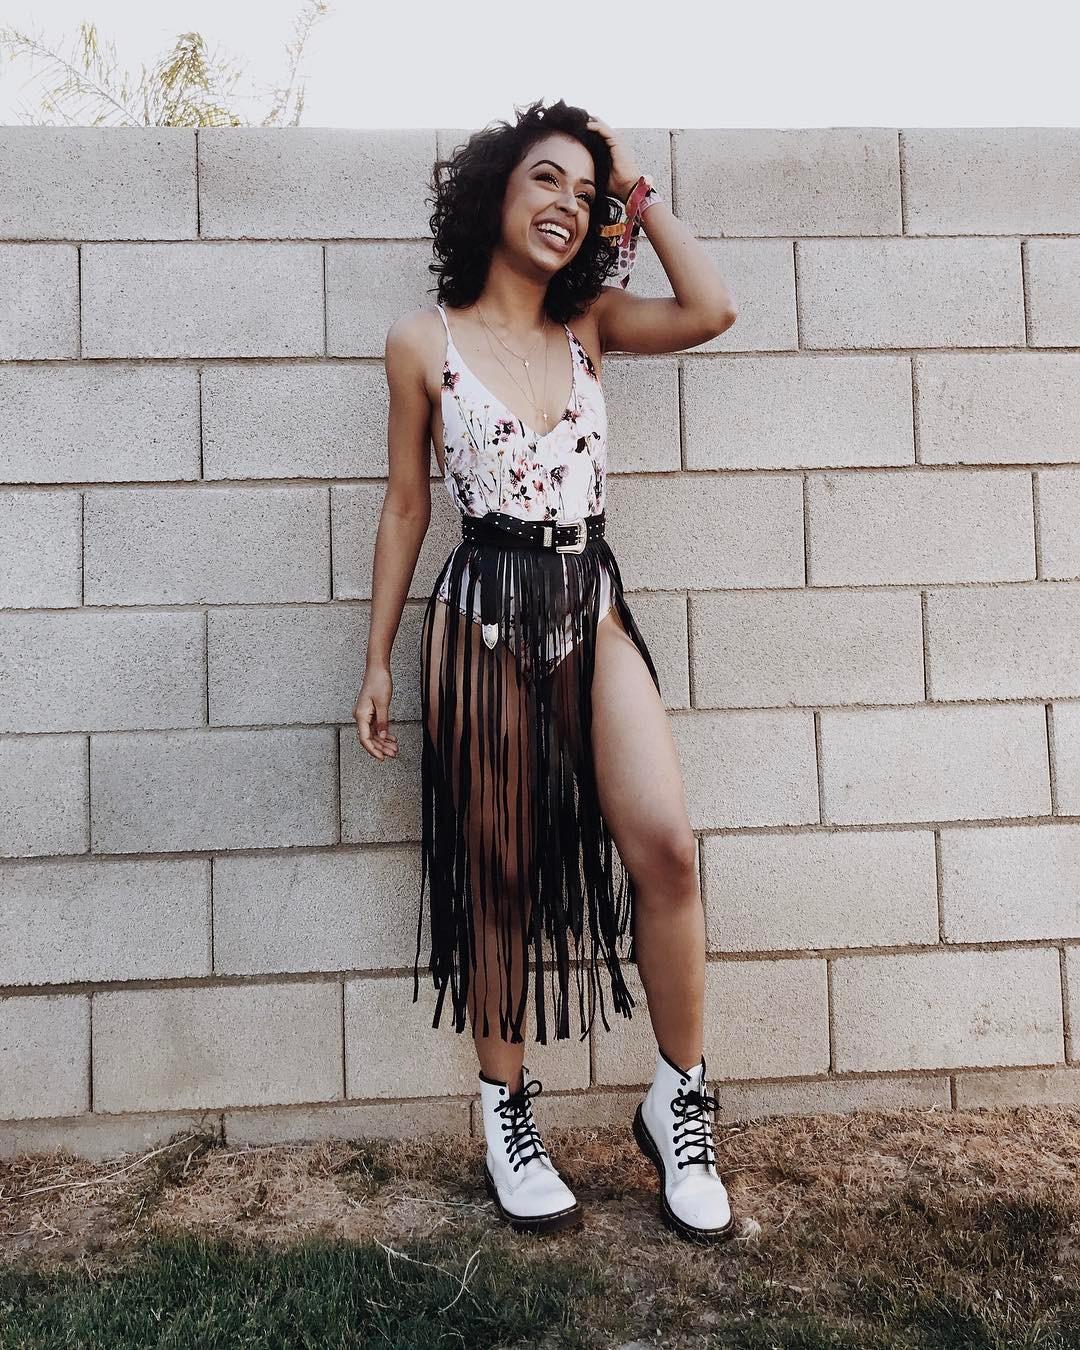 51 Sexy Liza Koshy Boobs Pictures Are A Charm For Her Fans 9